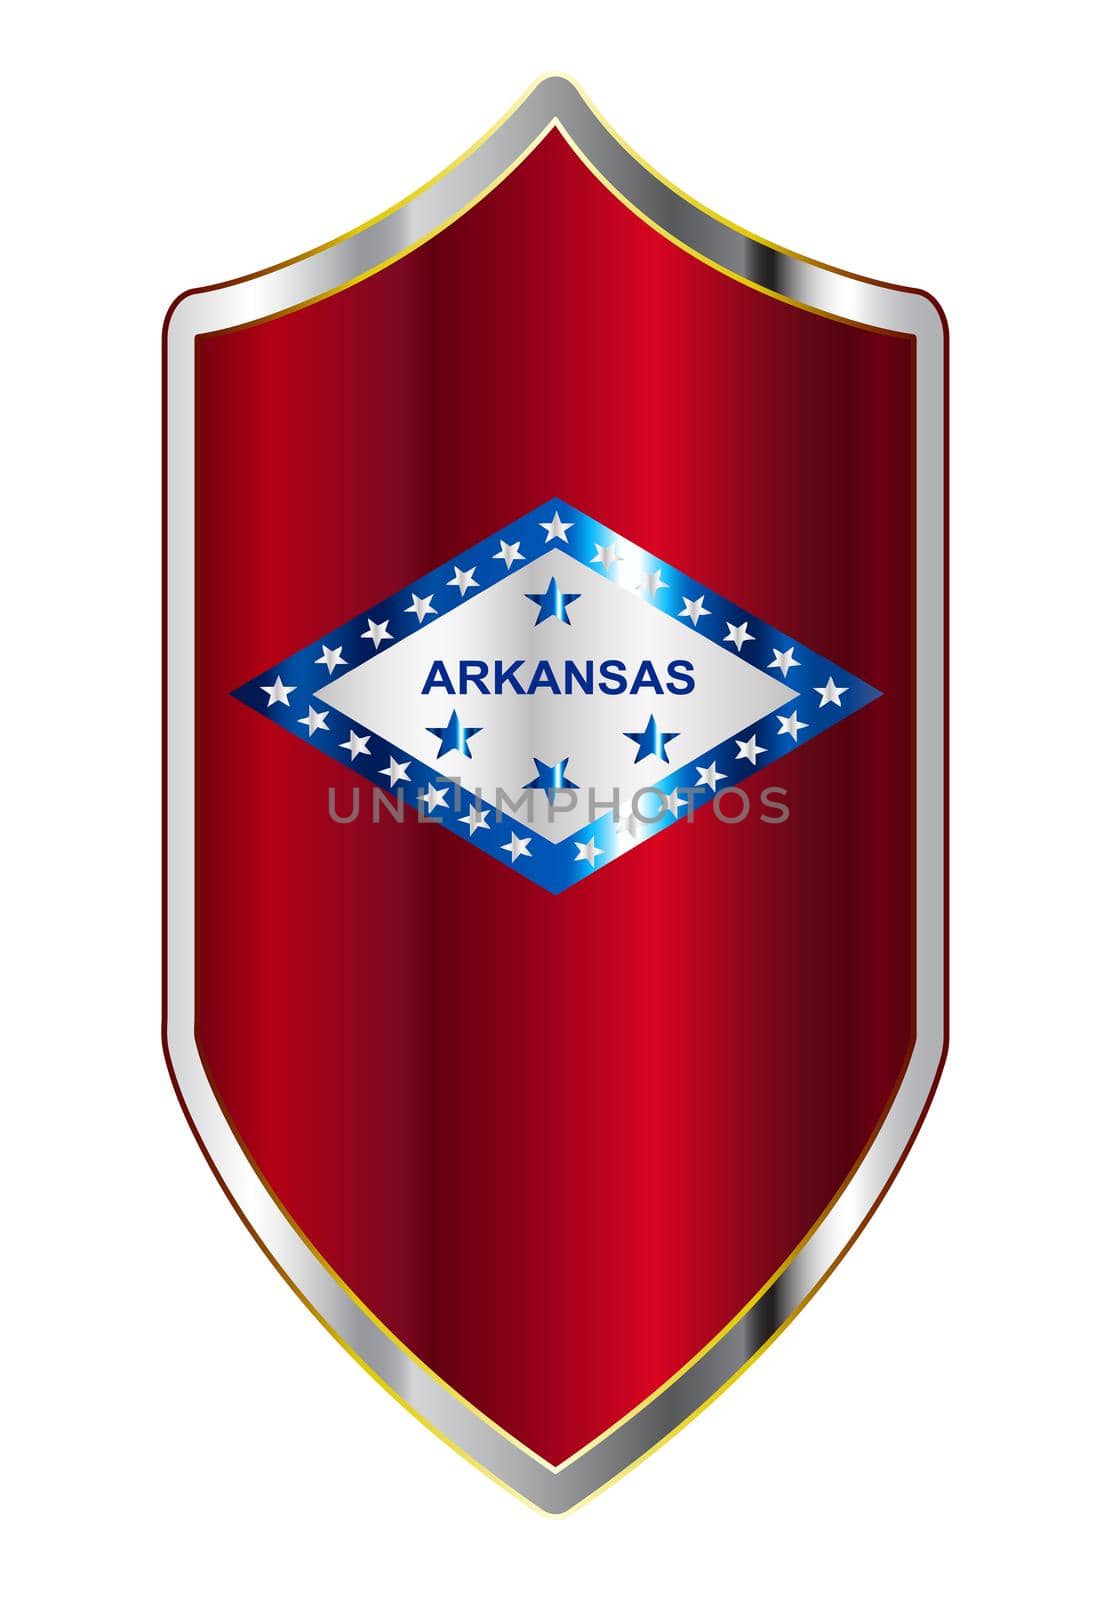 A typical crusader type shield with the state flag of Arkansas all isolated on a white background